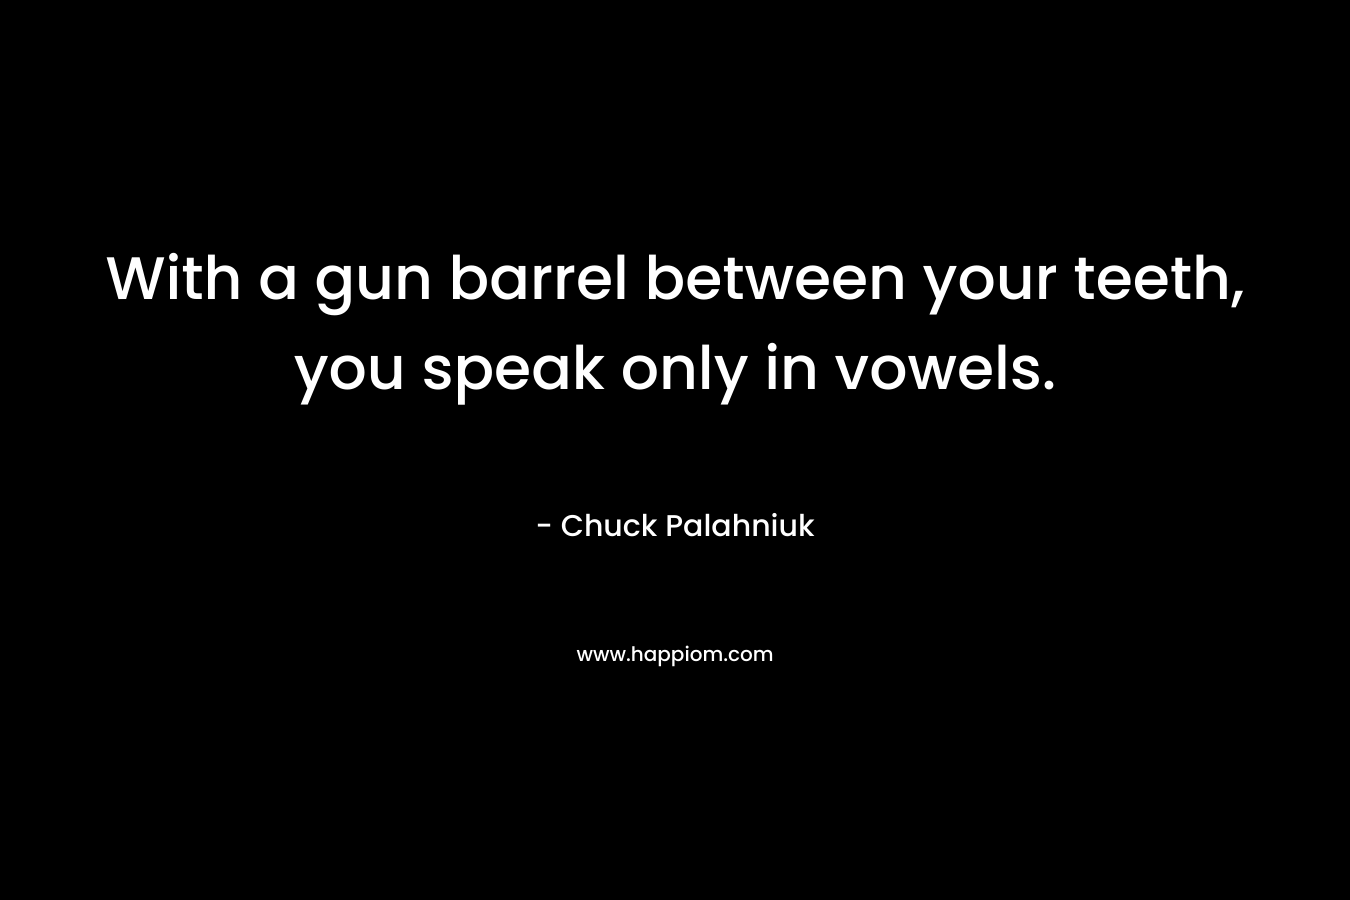 With a gun barrel between your teeth, you speak only in vowels.